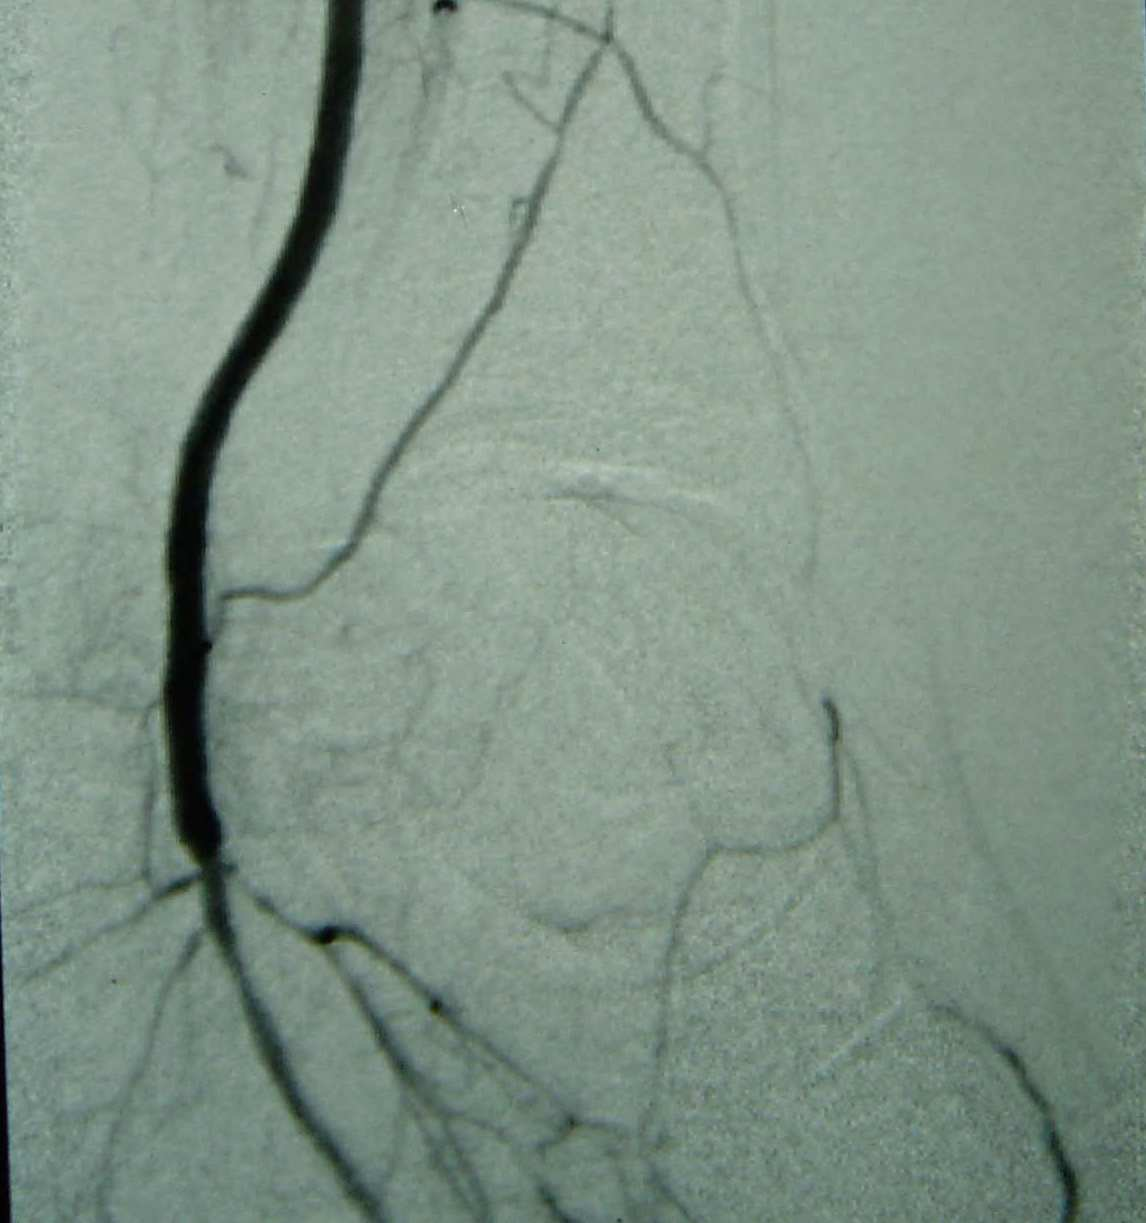 Saphenous vein conduit is the choice for FEMORO-DISTAL and INFRAPOPLITEAL by-pass as INITIAL option for CLI BASIL II - TASC - PREVENT III In patients with CLI, the absence of a good quality